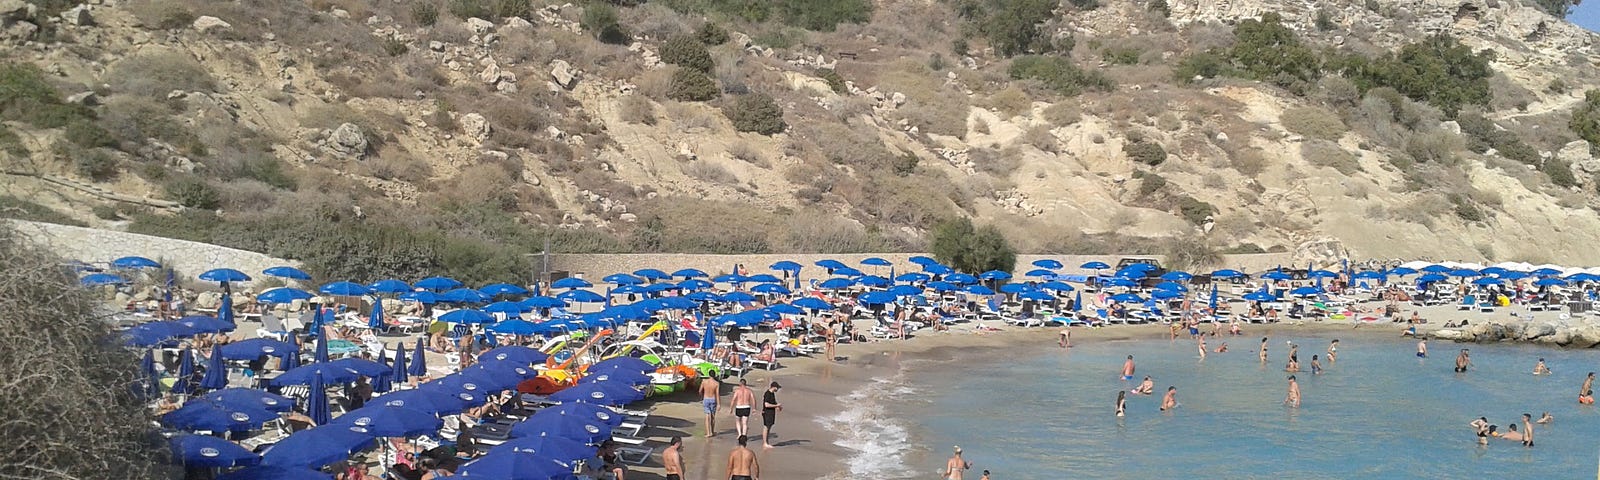 crowded beaches Konnos Beach a distant memory no longer permitted with social dsitancing